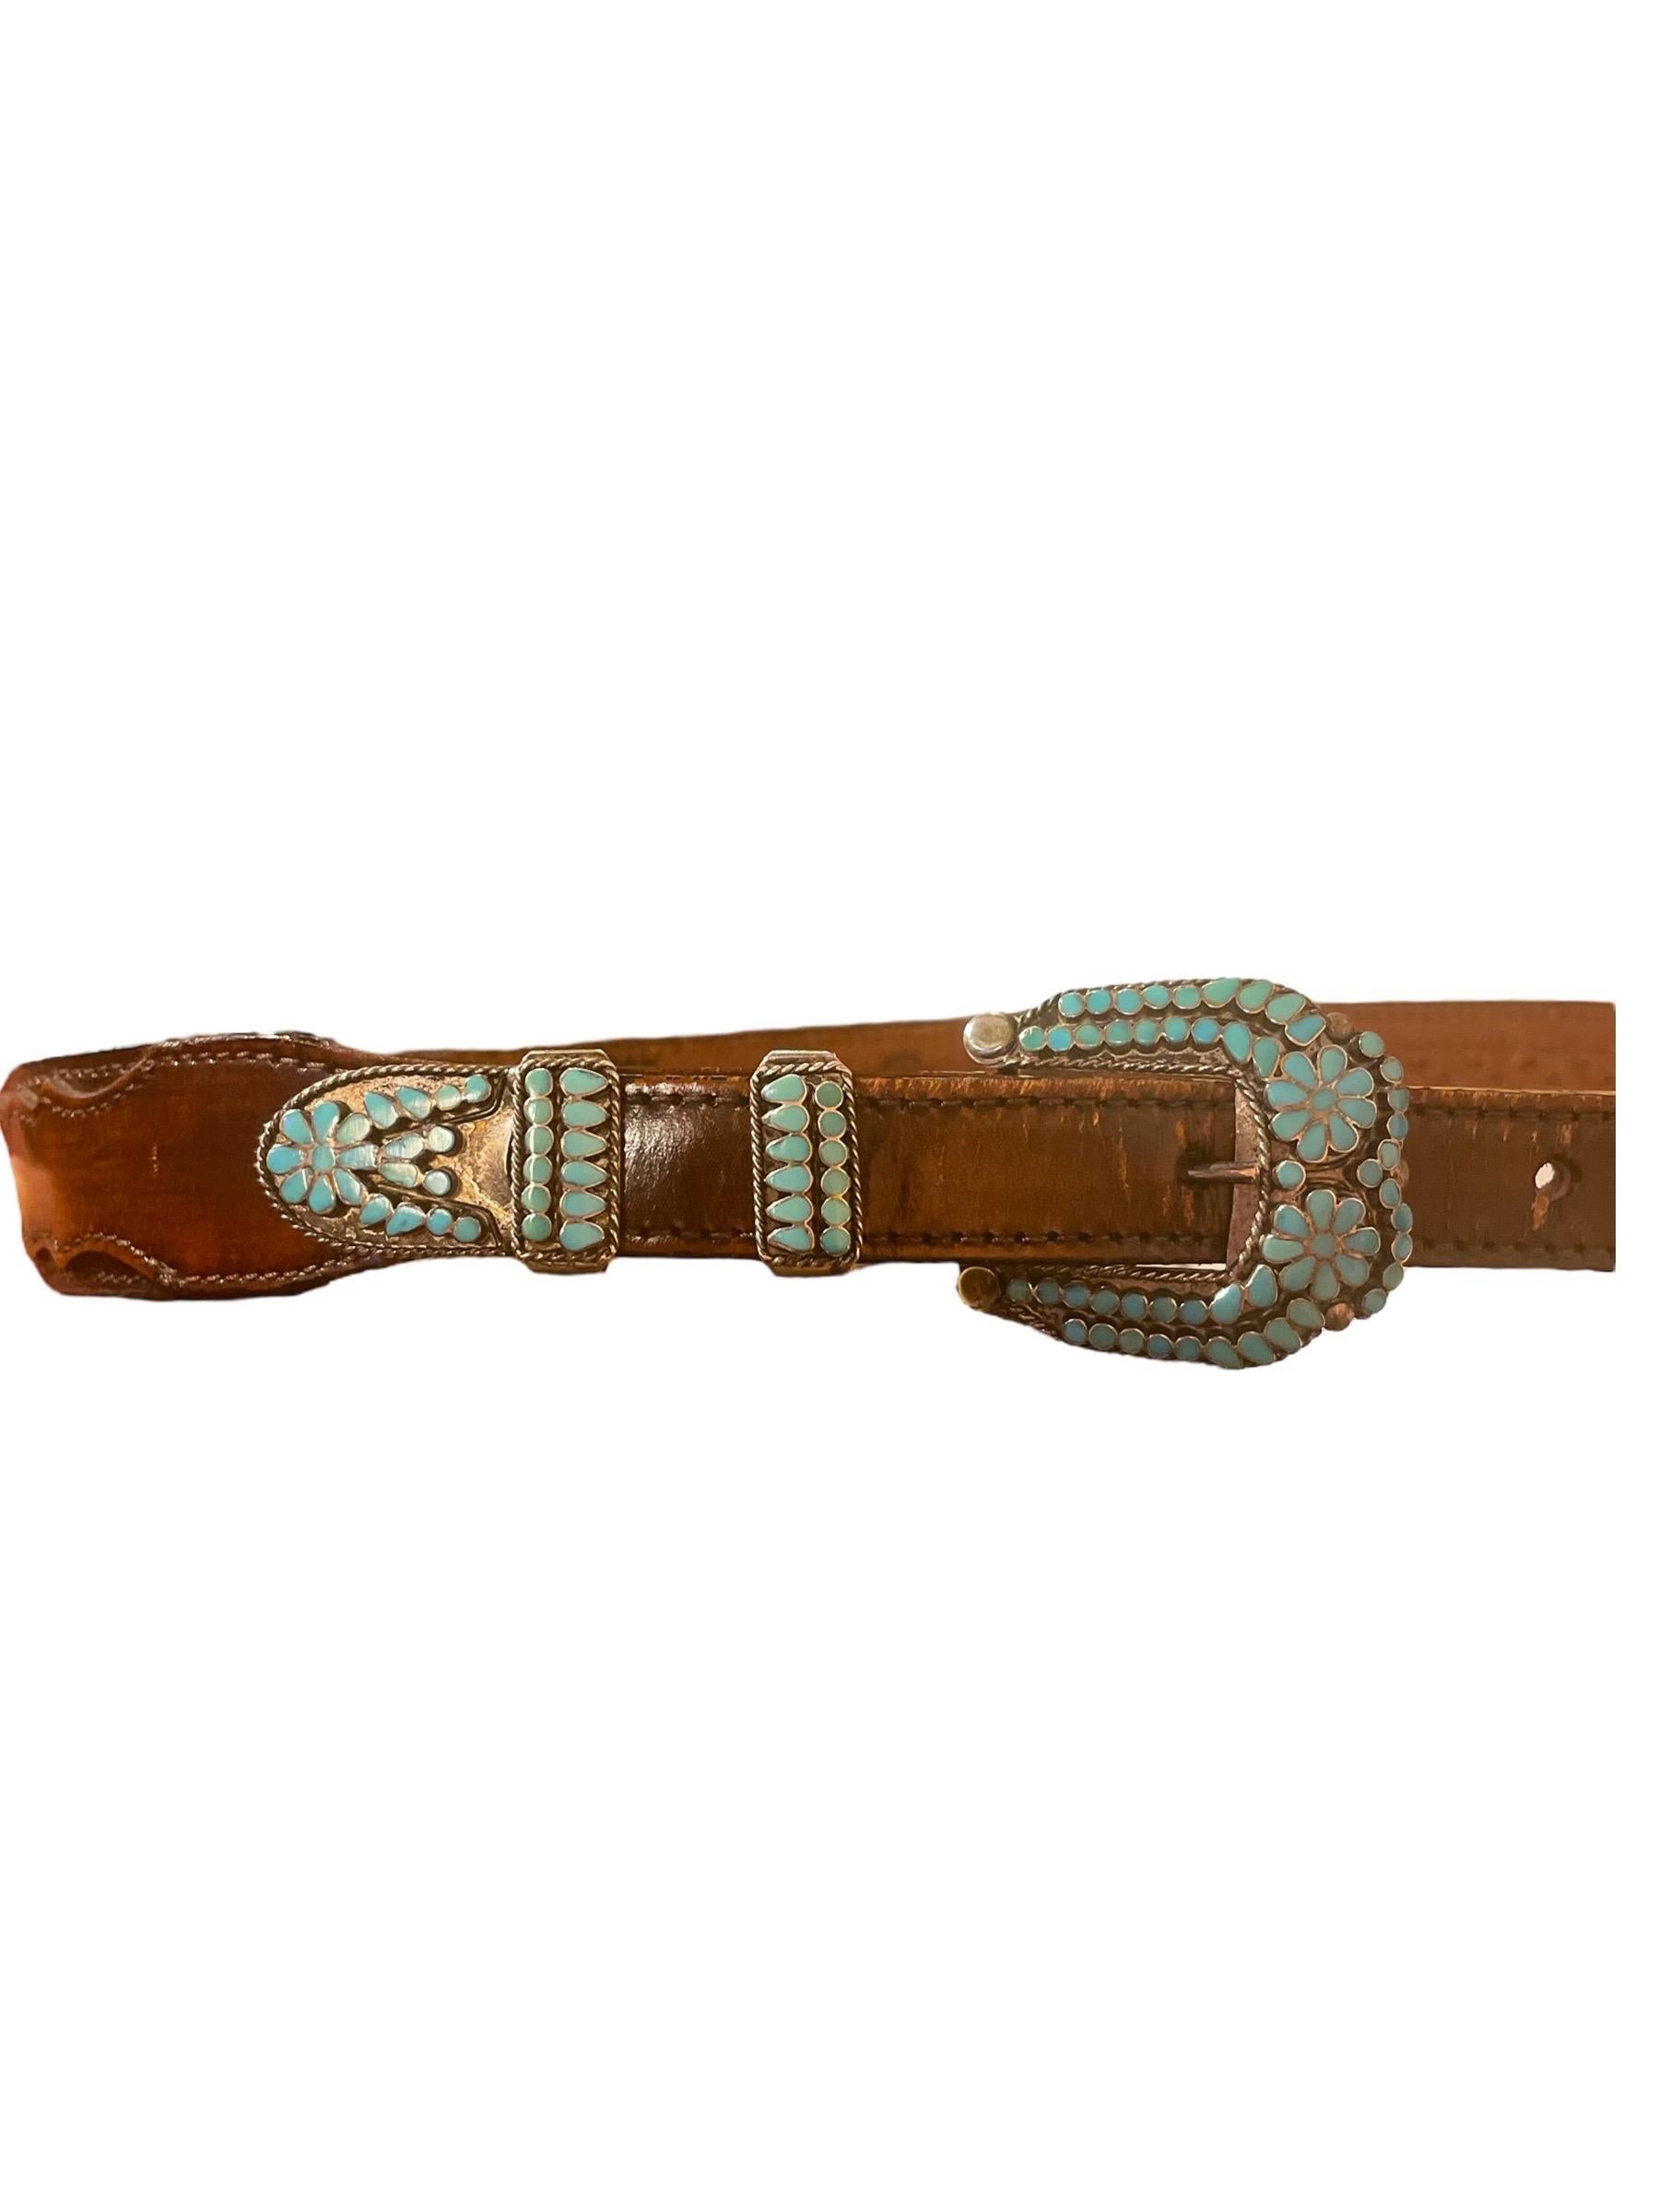 Vintage Native American Inlaid Turquoise, Silver & Hand-tooled Leather Belt 1